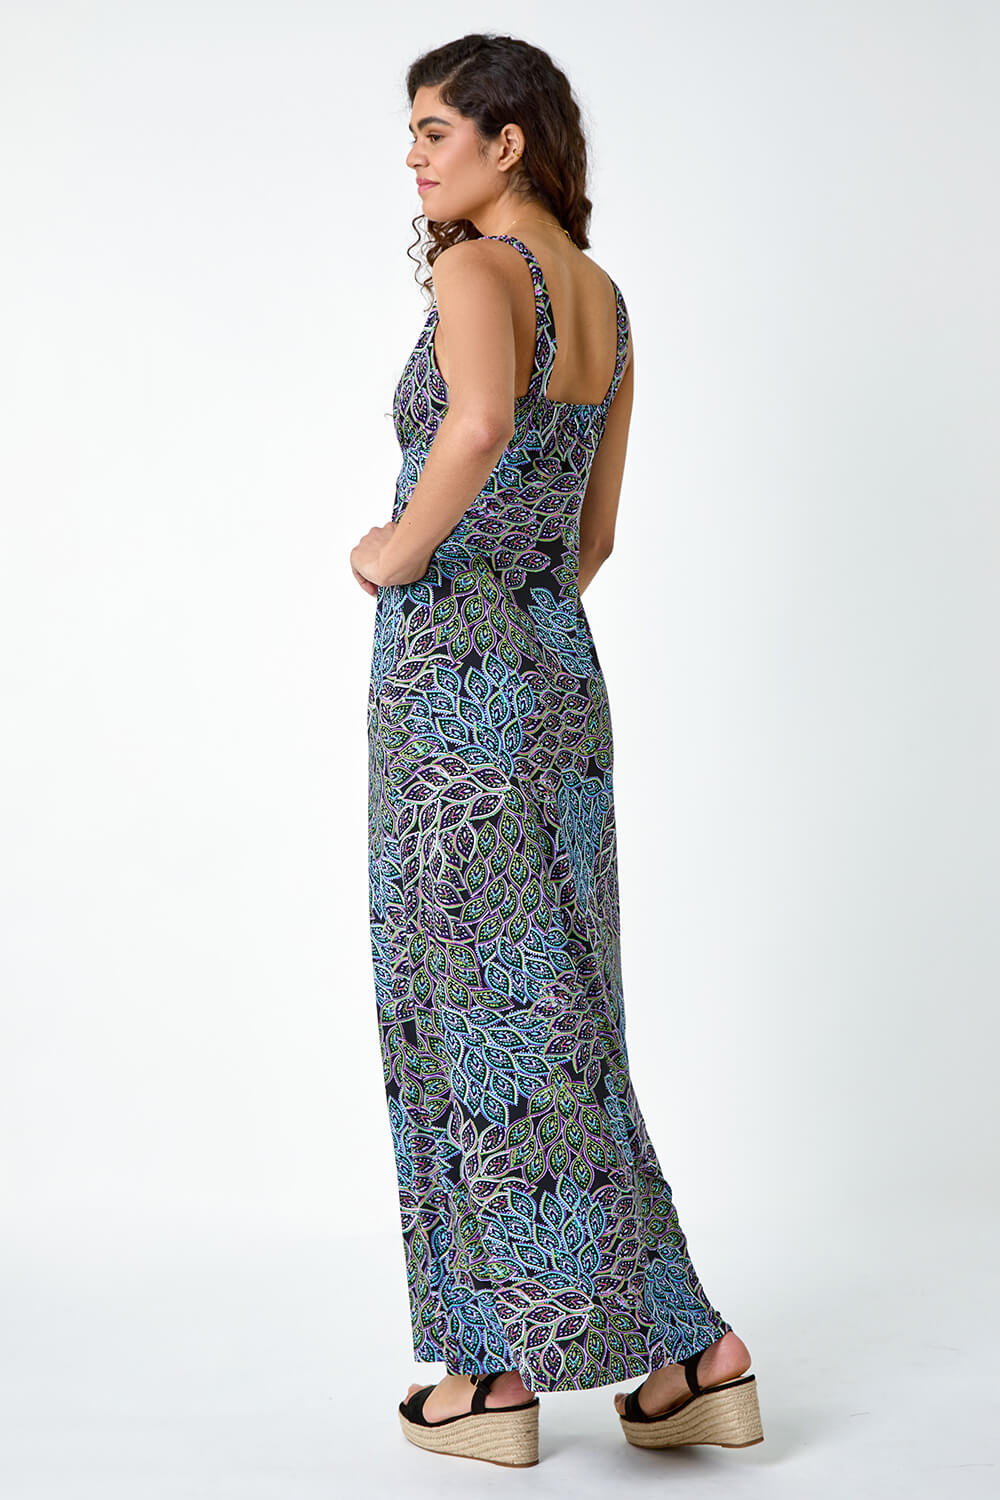 Black Abstract Animal Print Stretch Maxi Dress, Image 3 of 5